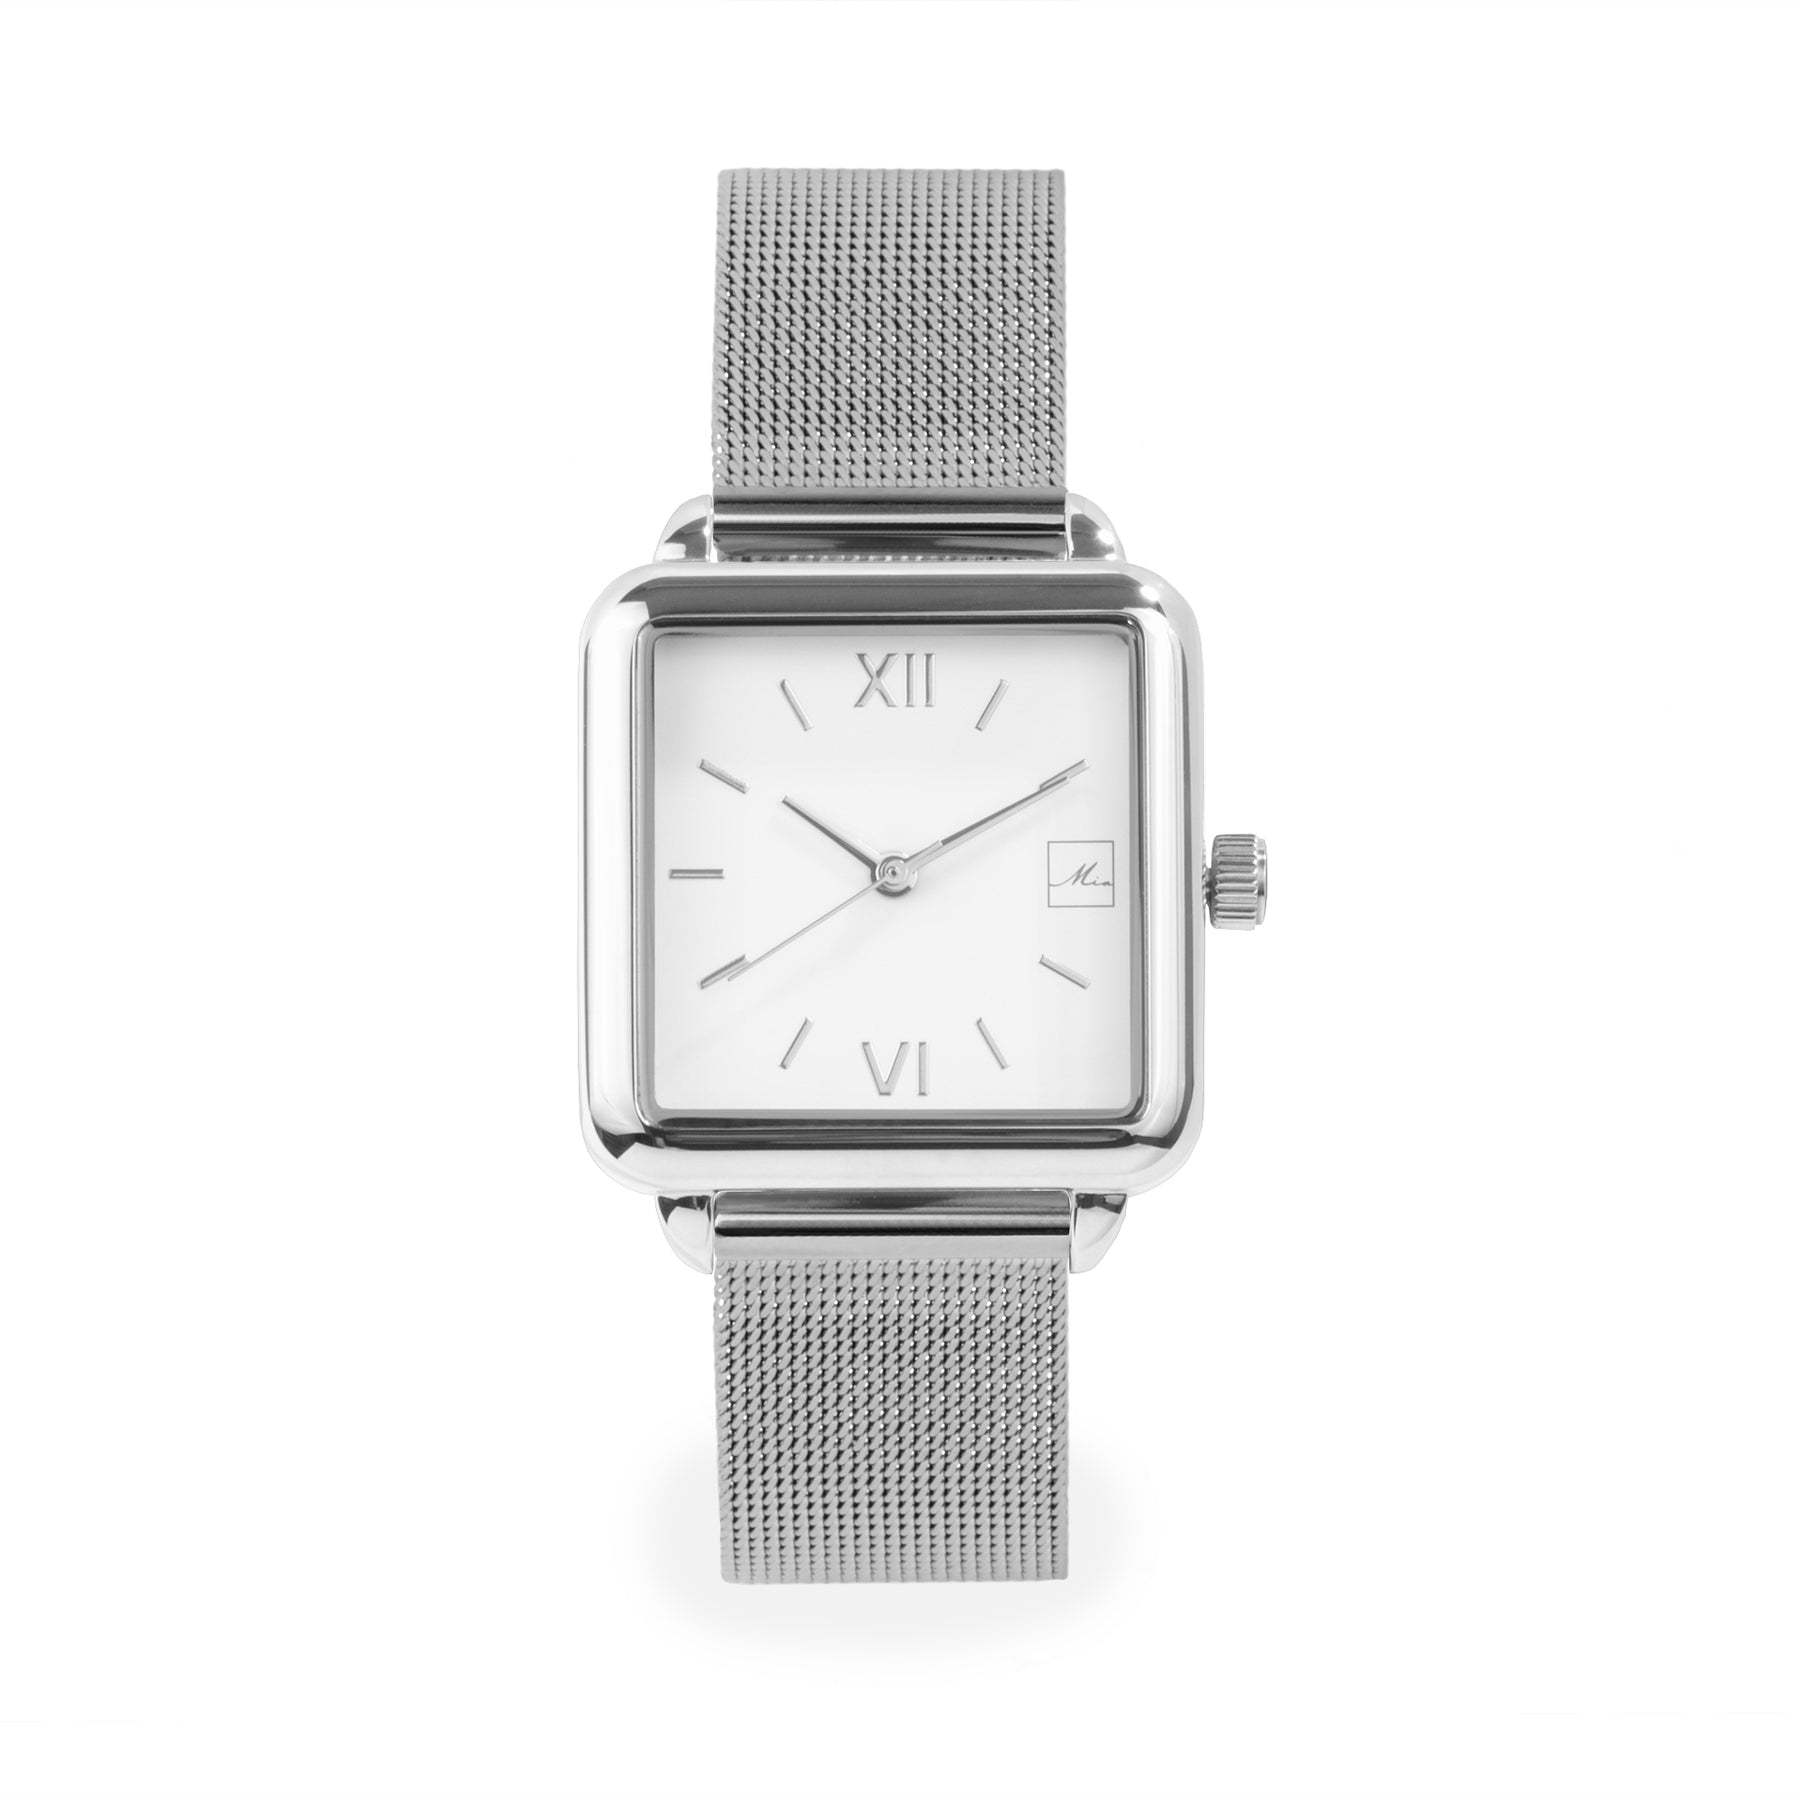 Stainless steel square watch